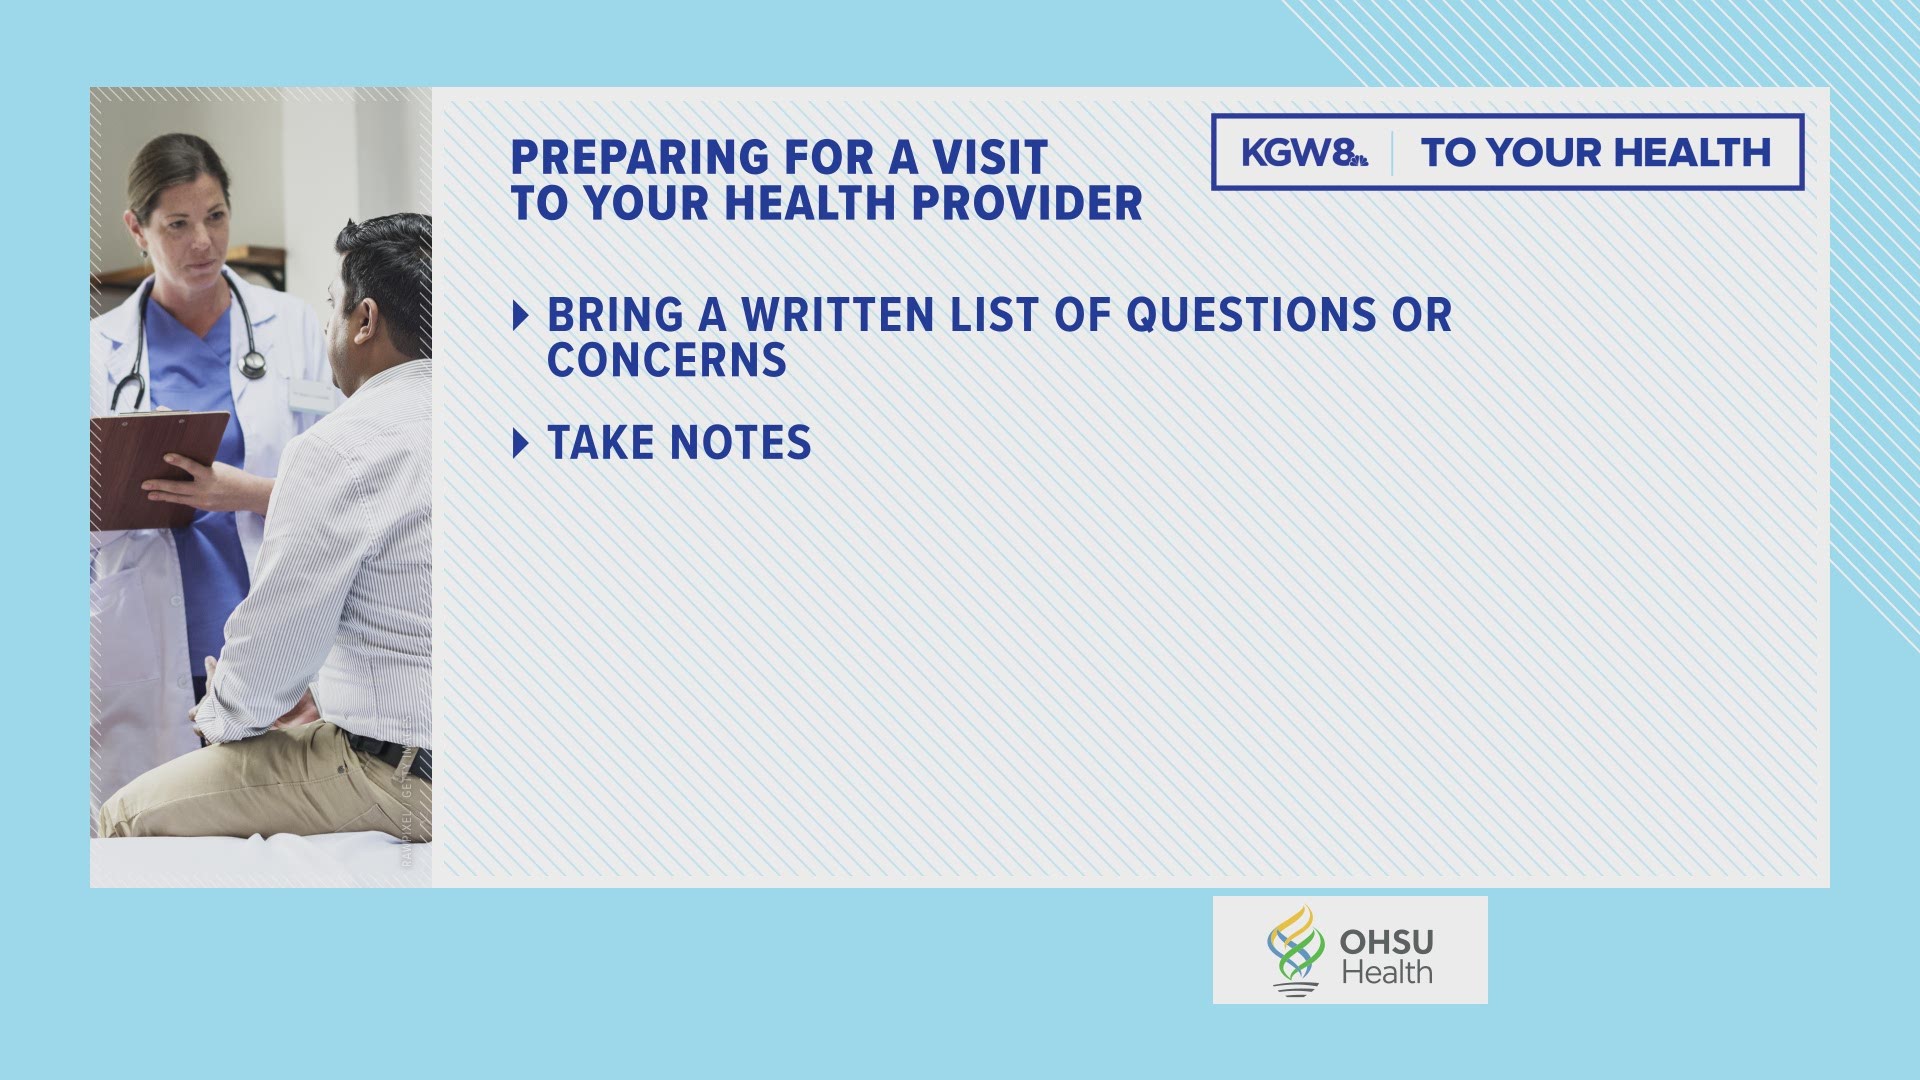 From OHSU Health, here are five tips to prepare for a visit to your health provider.